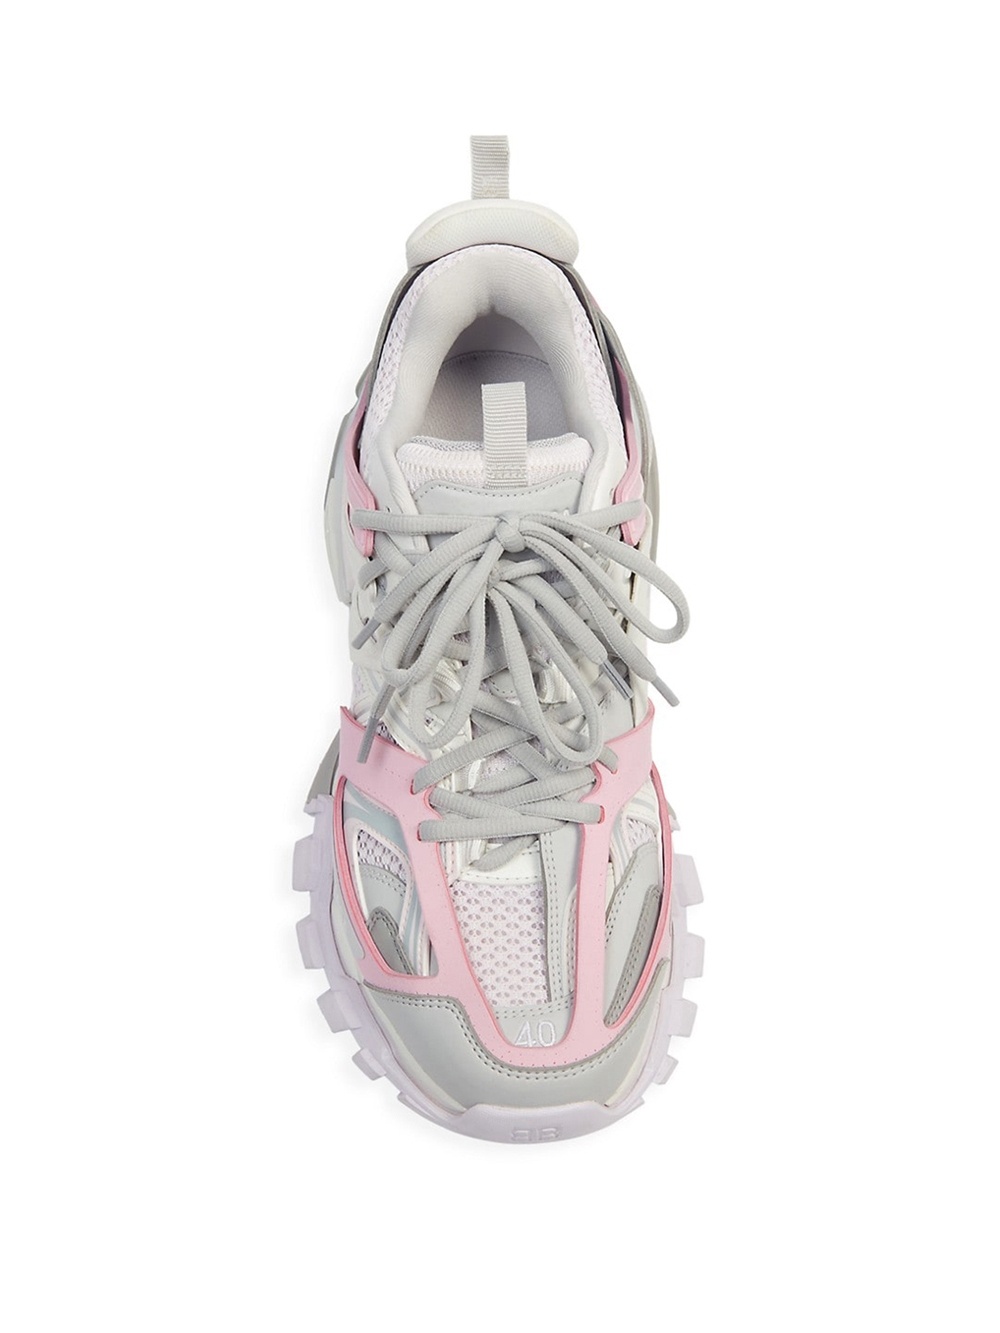 LED Track Sneaker Grey Pink and White - 4